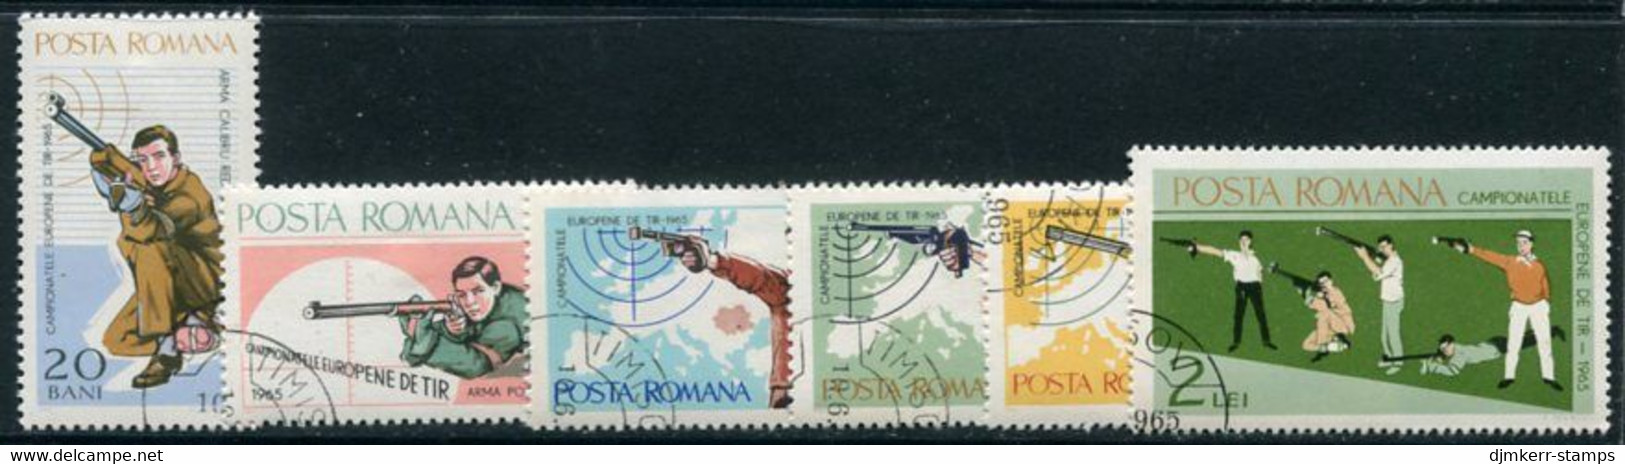 ROMANIA 1965 European Shooting Championships Perforated Used.  Michel 2407-12 - Used Stamps